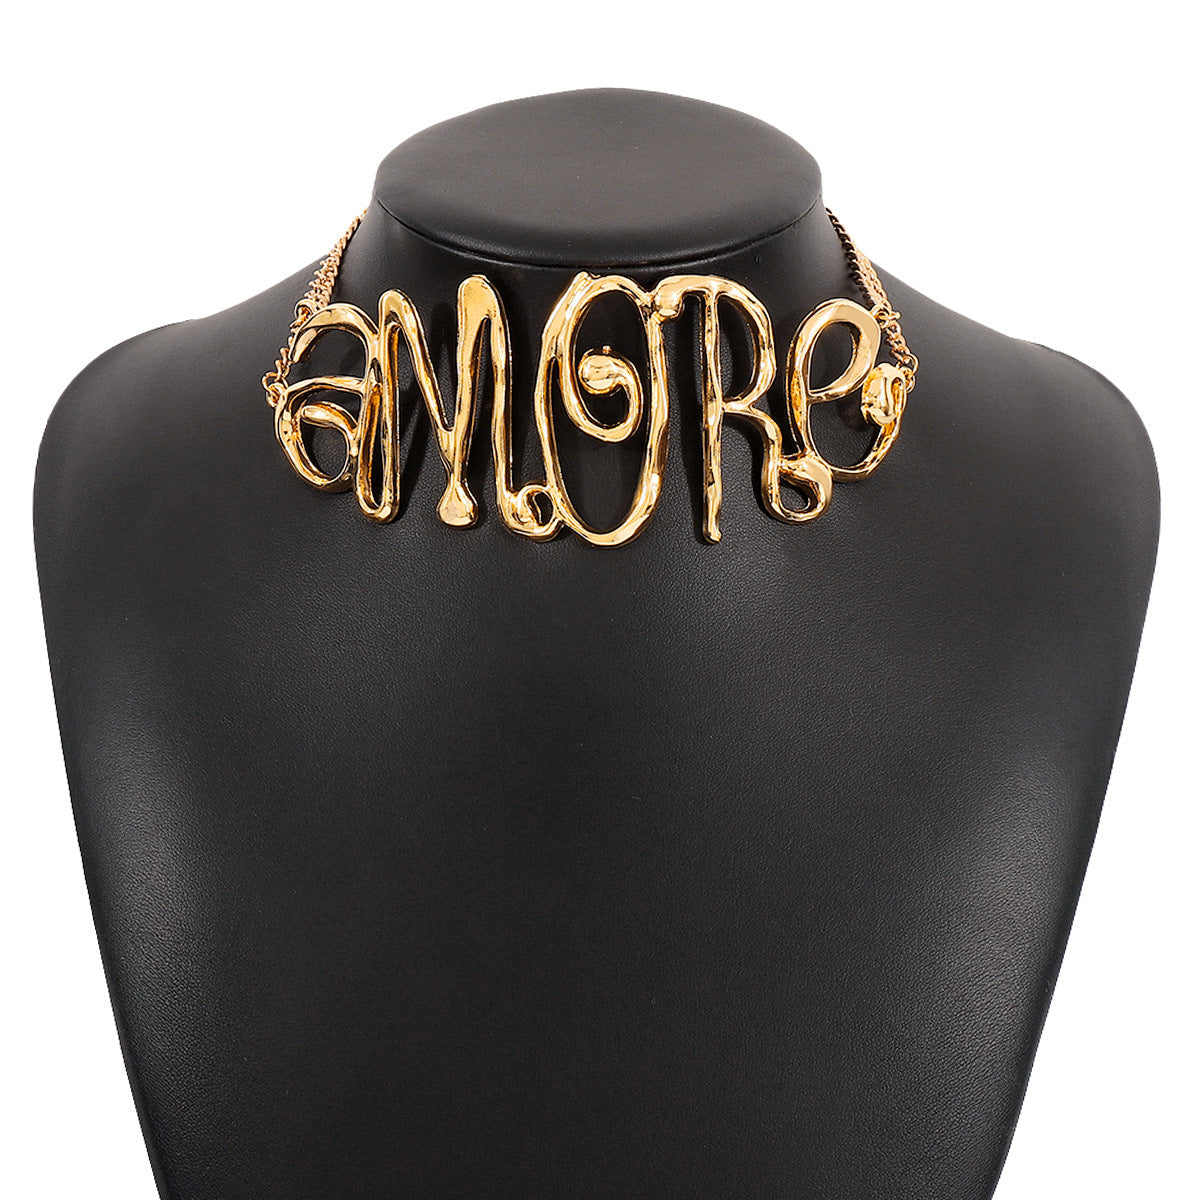 Exaggerated letters, cool necklace, retro fashionable hip-hop style necklace